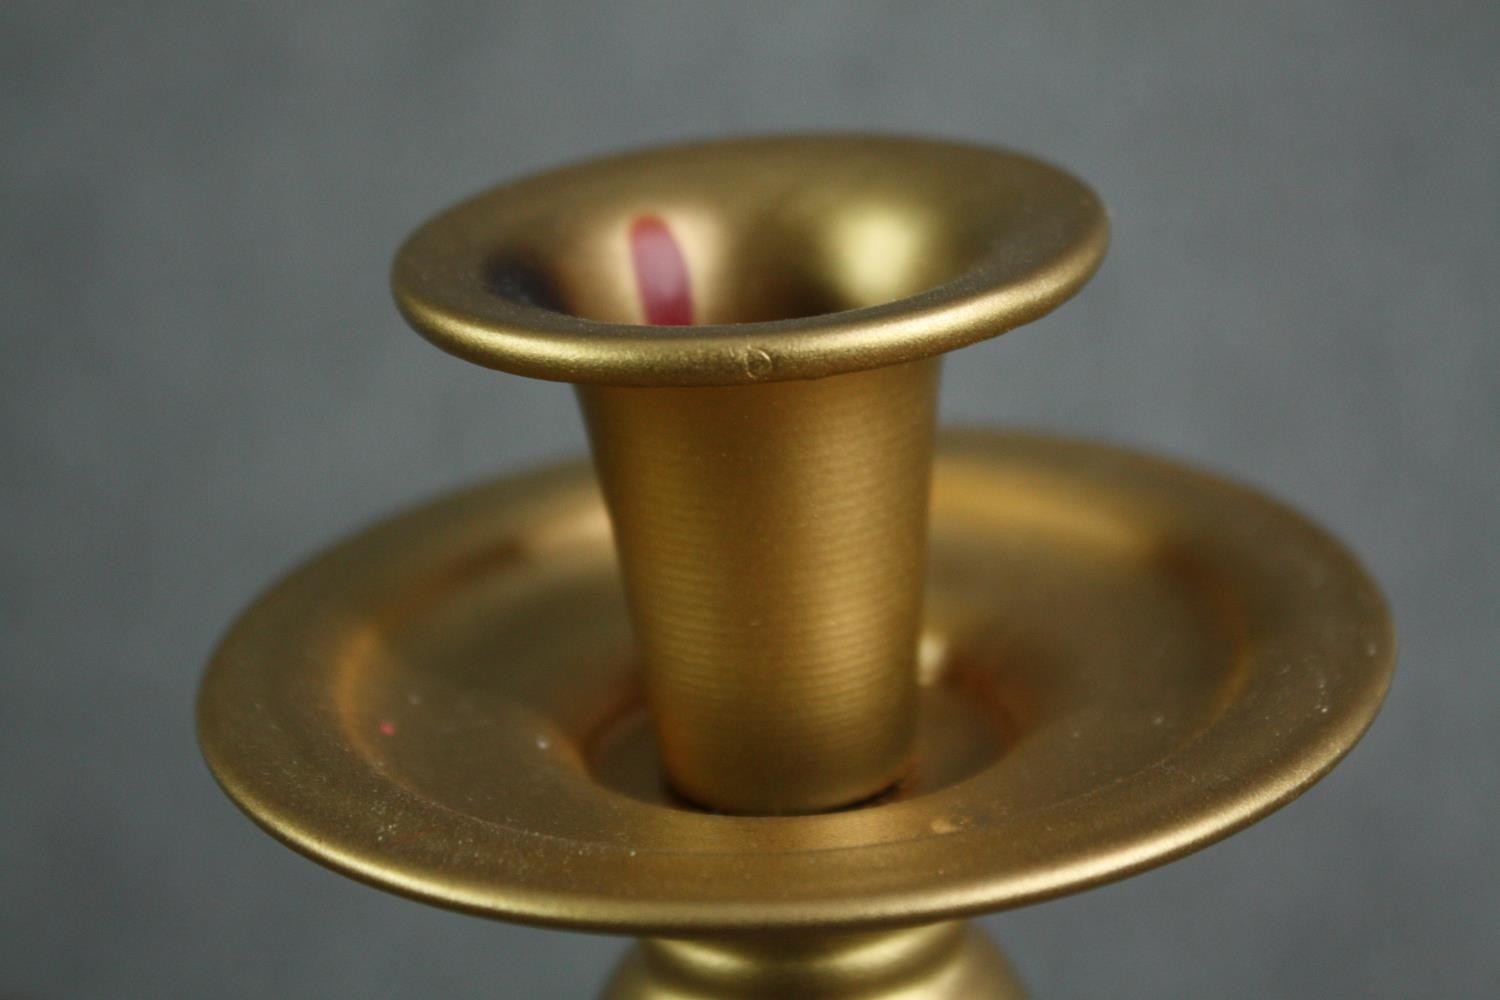 A pair of ornate candle holders, each with four arms for holding candles and a central - Image 6 of 6